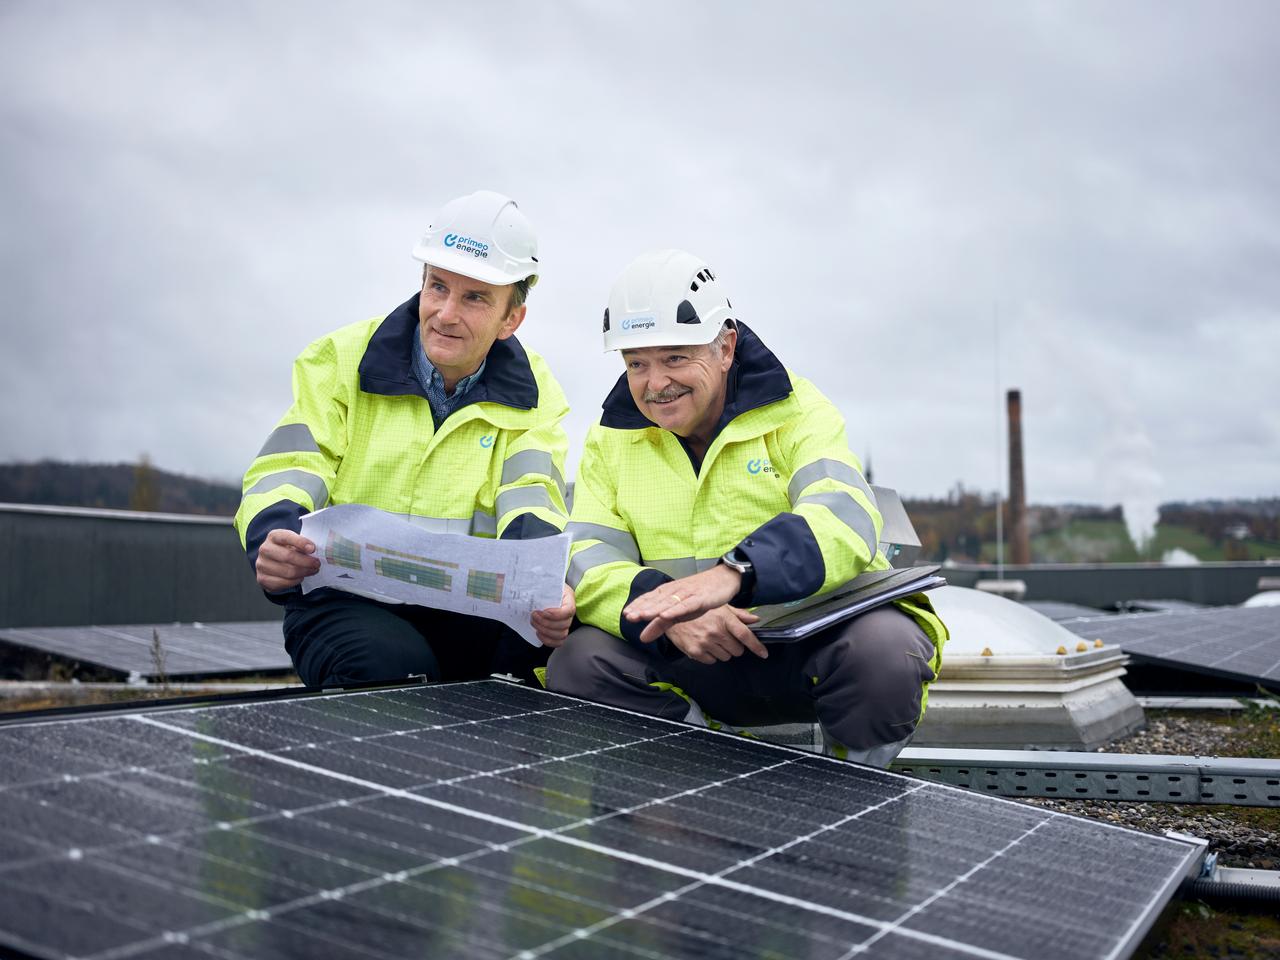  Two Primeo Energie engineers in high-visibility waistcoats and helmets inspect a solar installation on a roof. They study construction plans and note down details. 